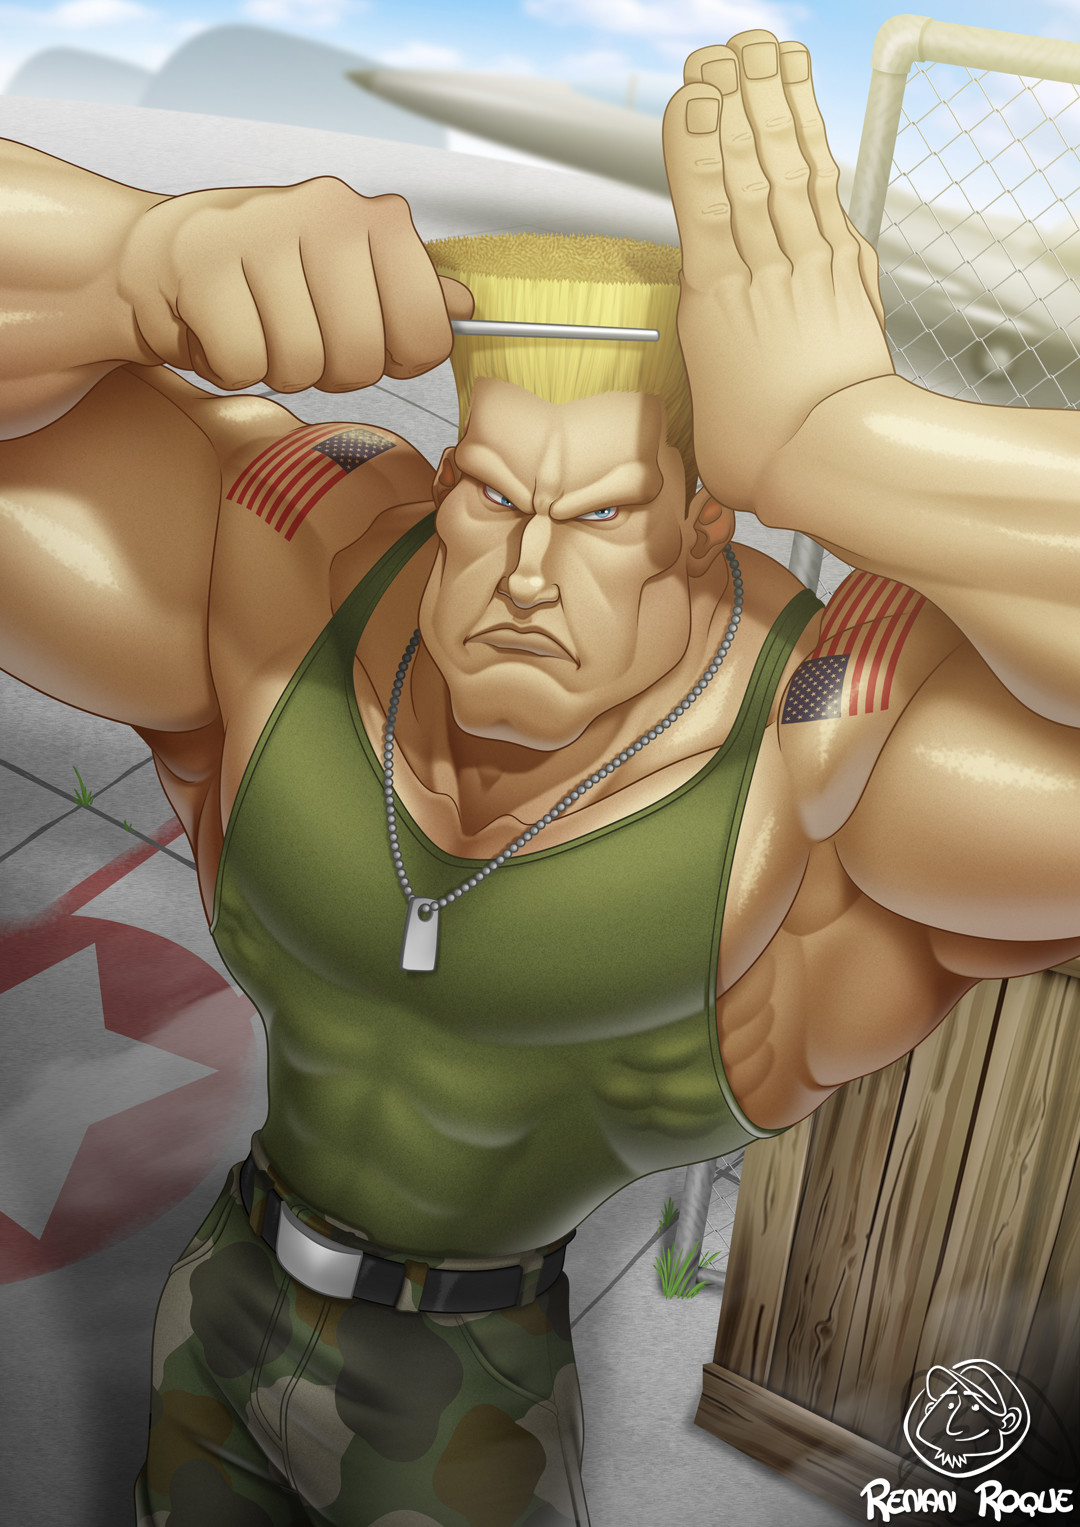 Renan Roque - Guile (Street Fighter)